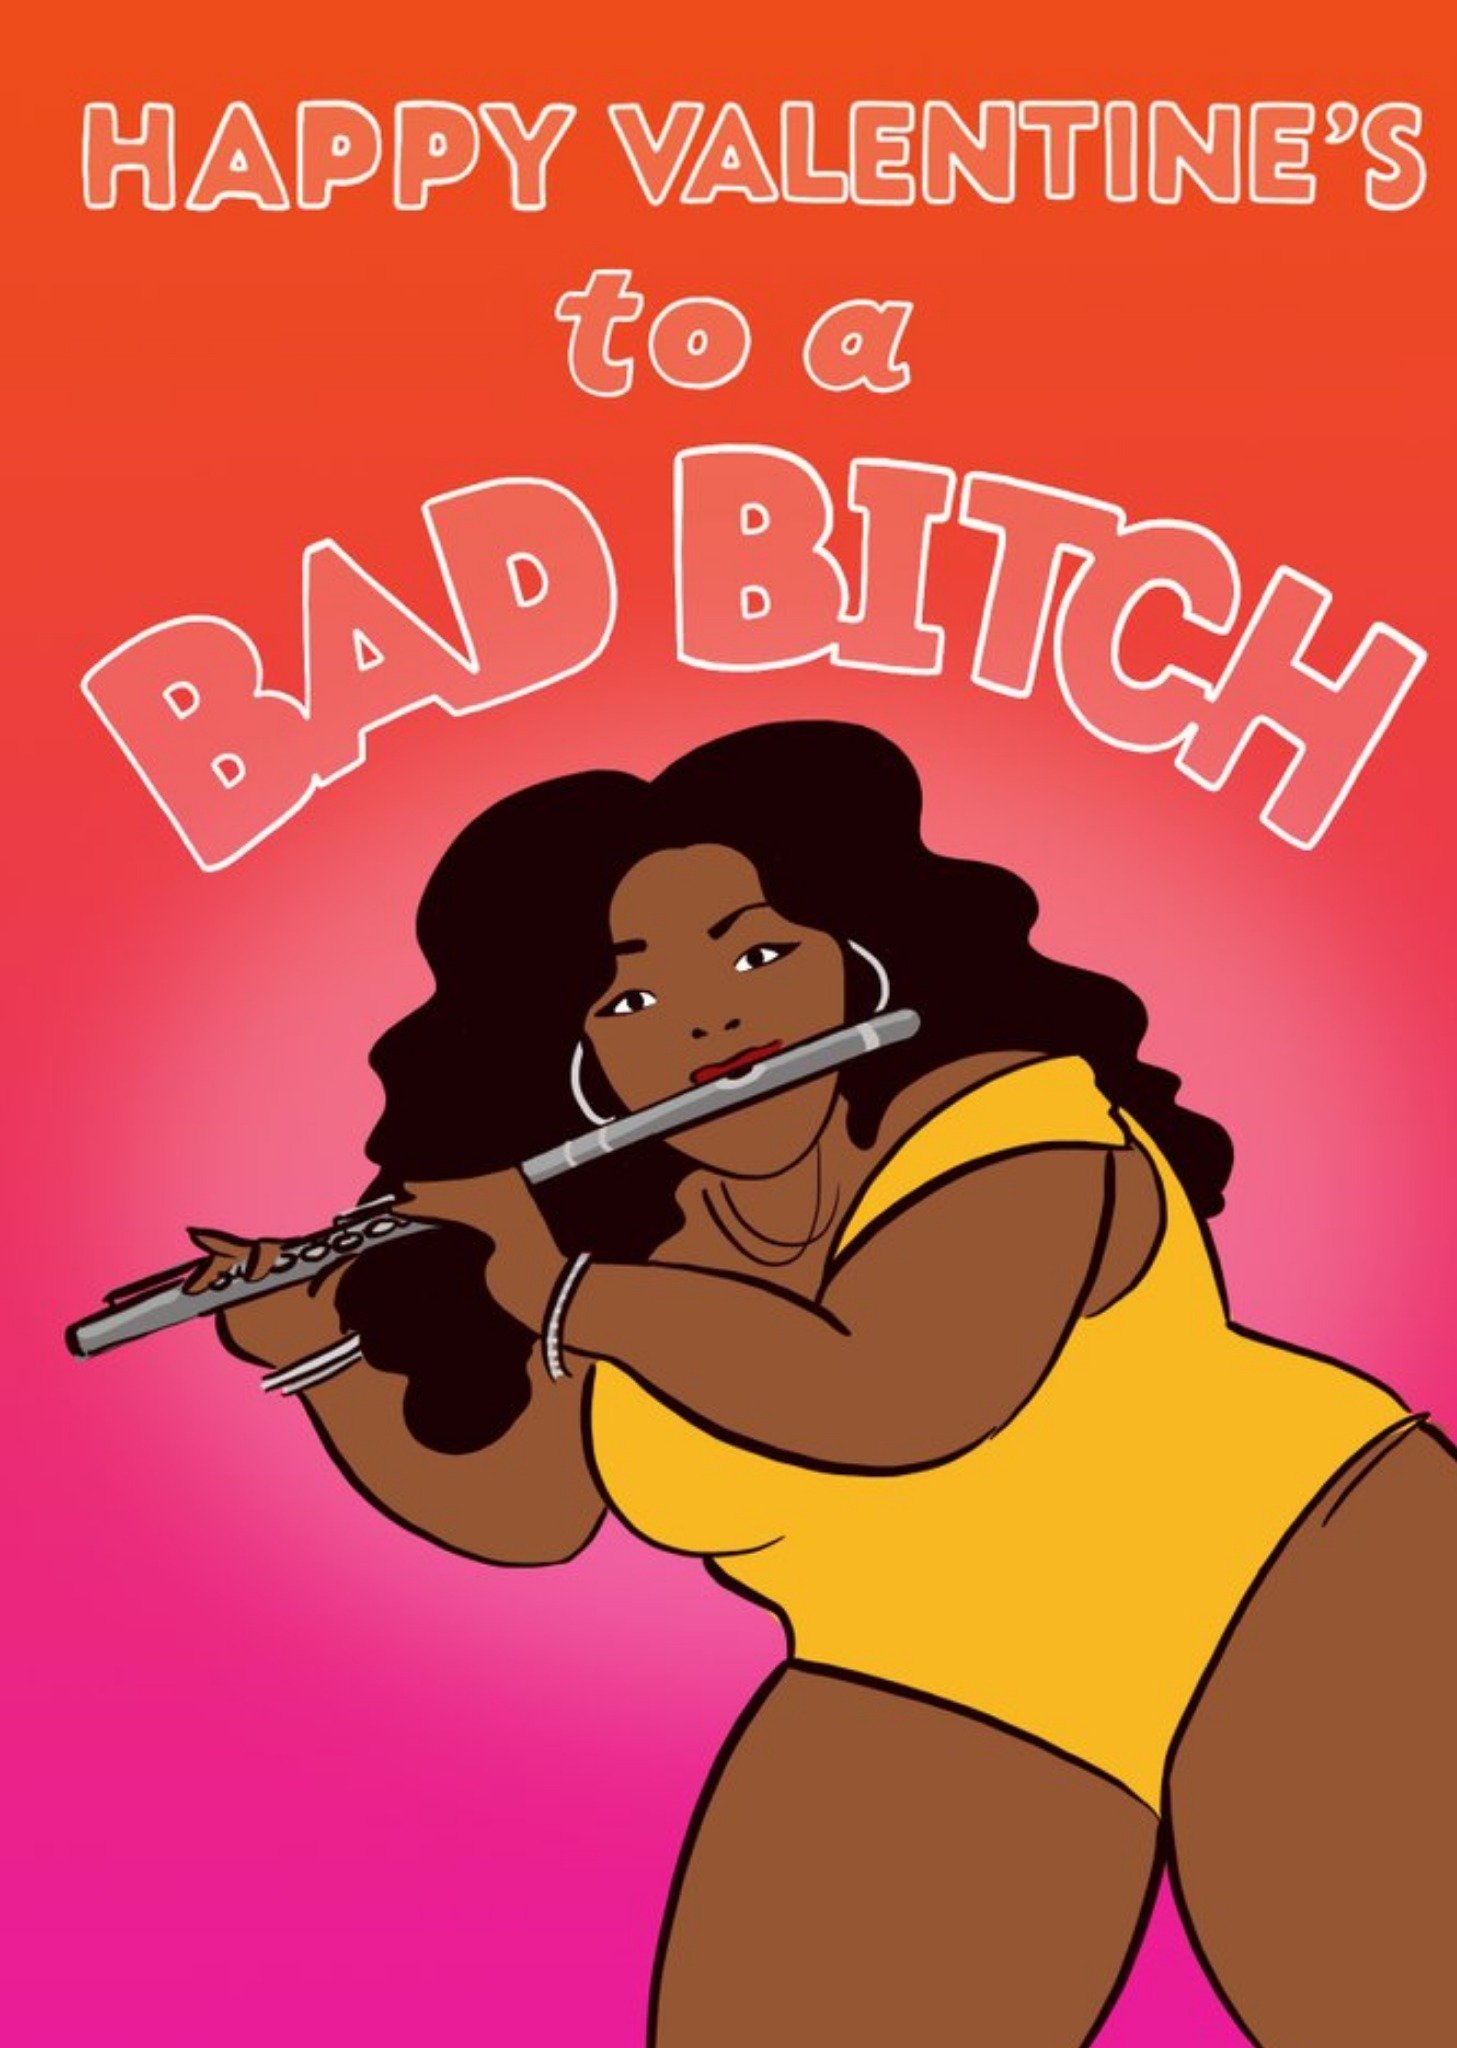 Moonpig Funny Topical Lizzo Bad Bitch Valentine's Day Card, Large